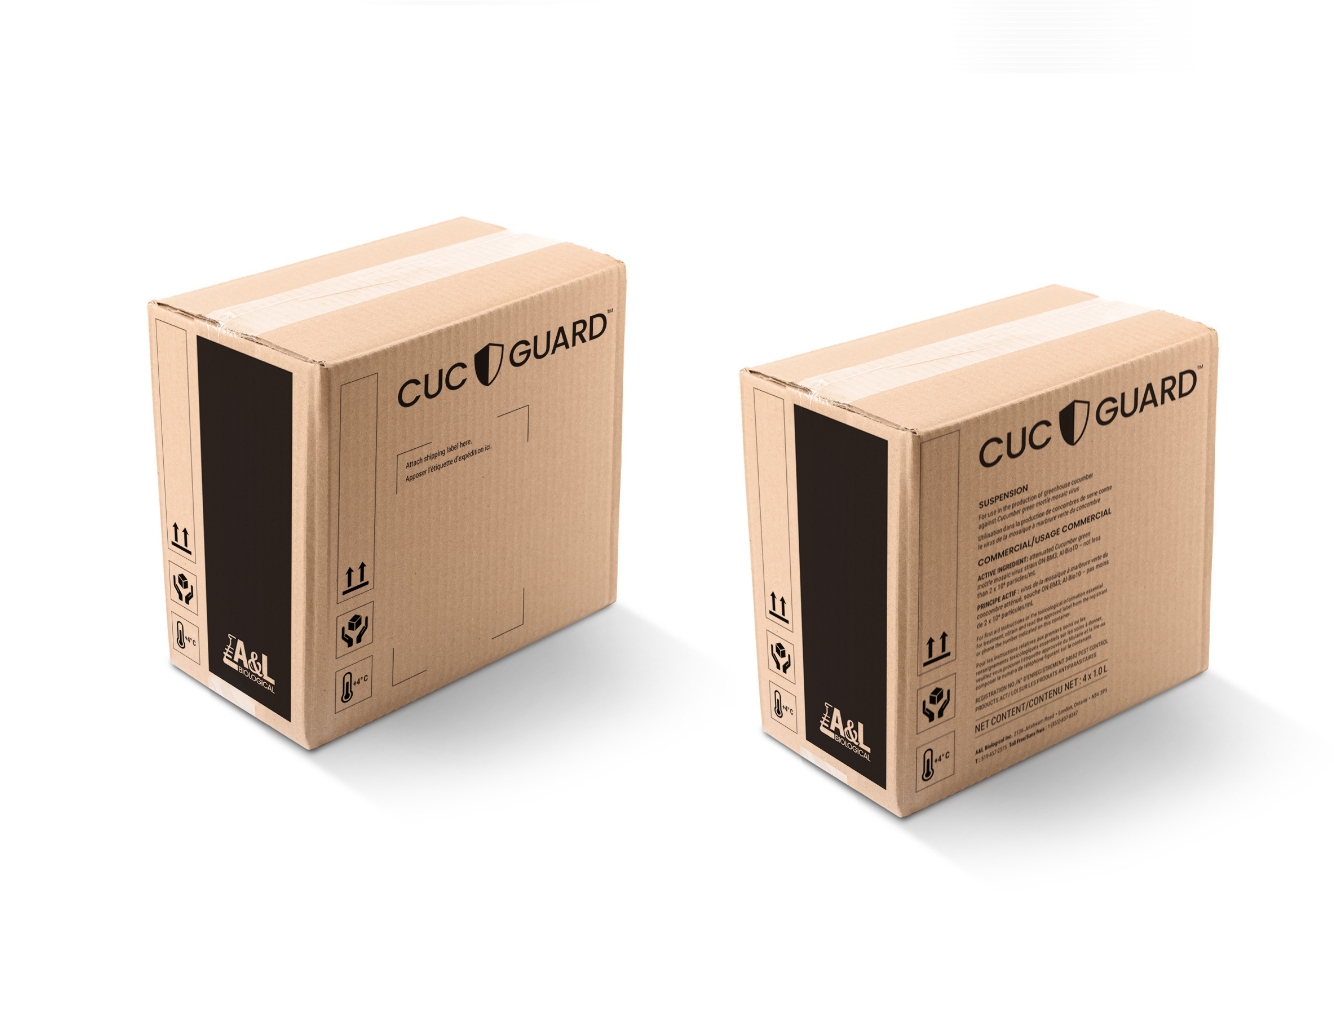 Two shipping boxes for the Cuc-Guard bottles